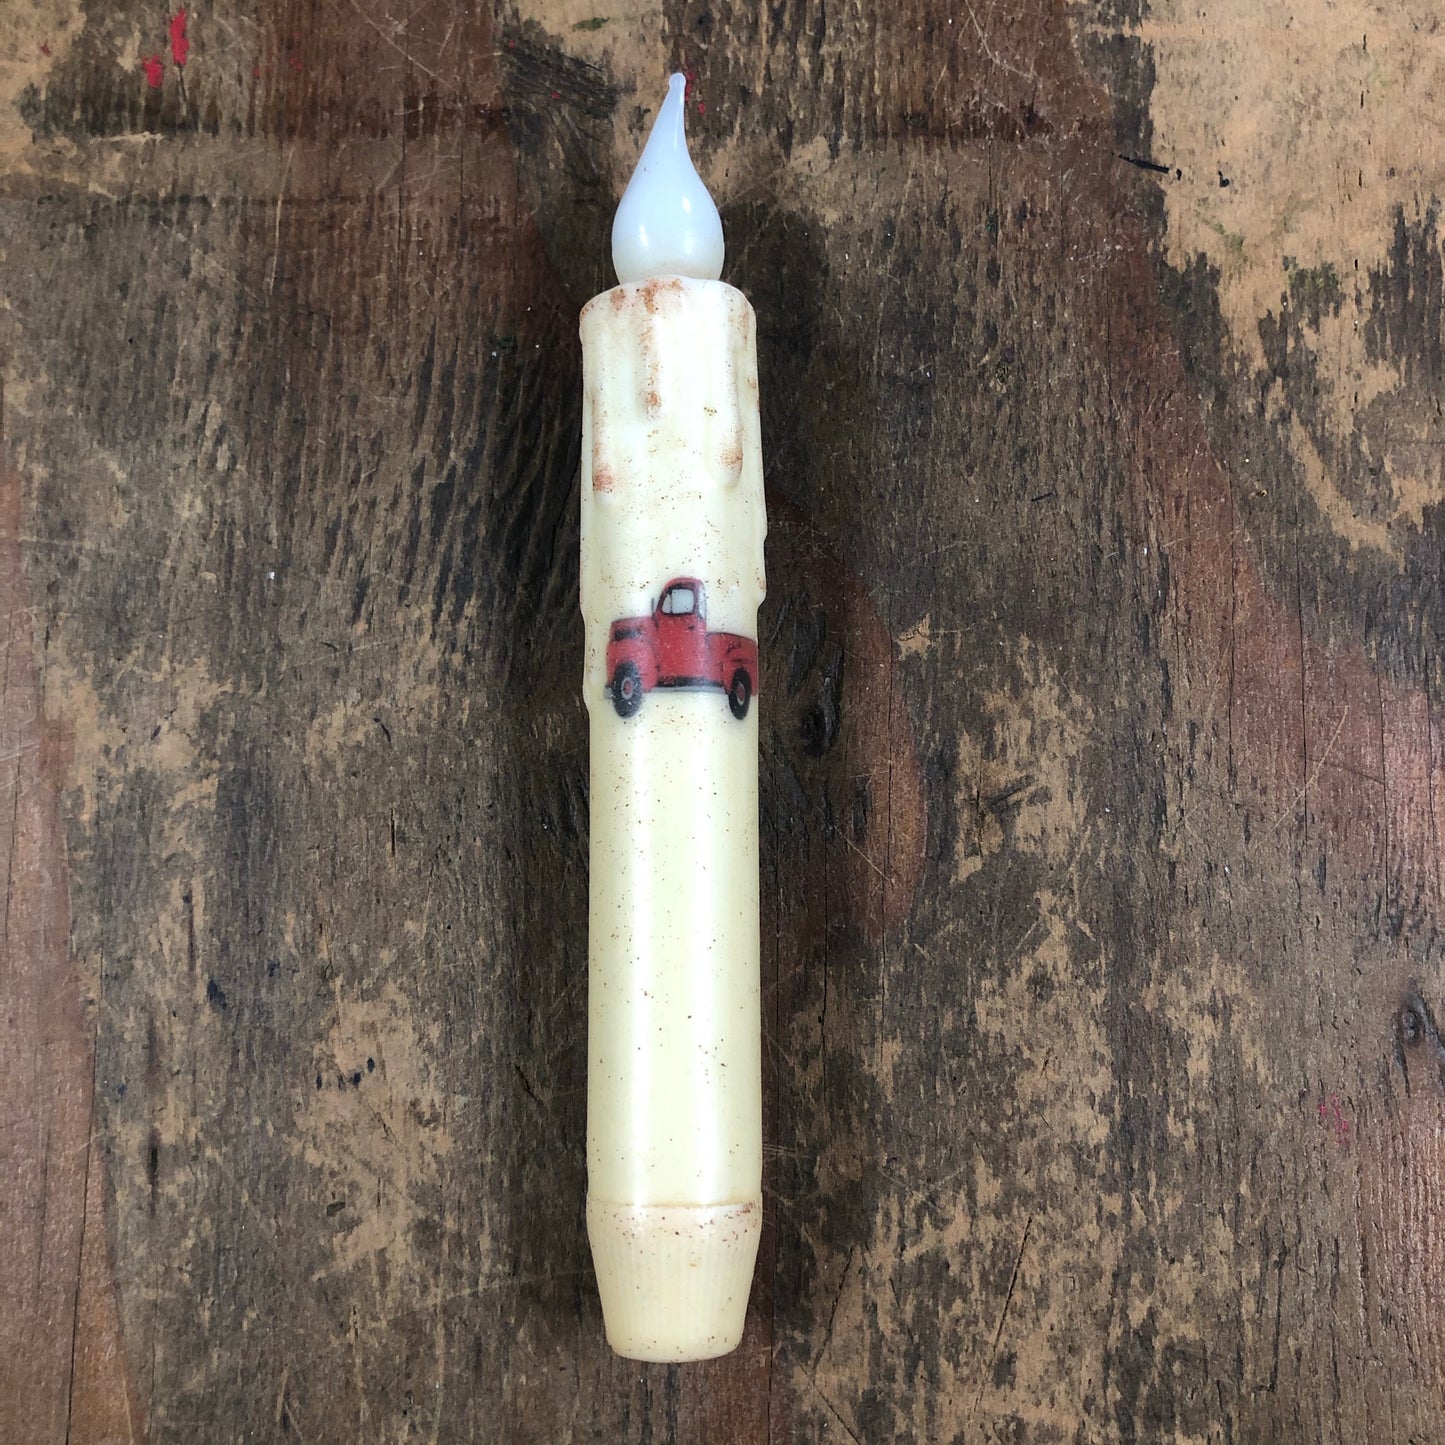 Large Battery Candle